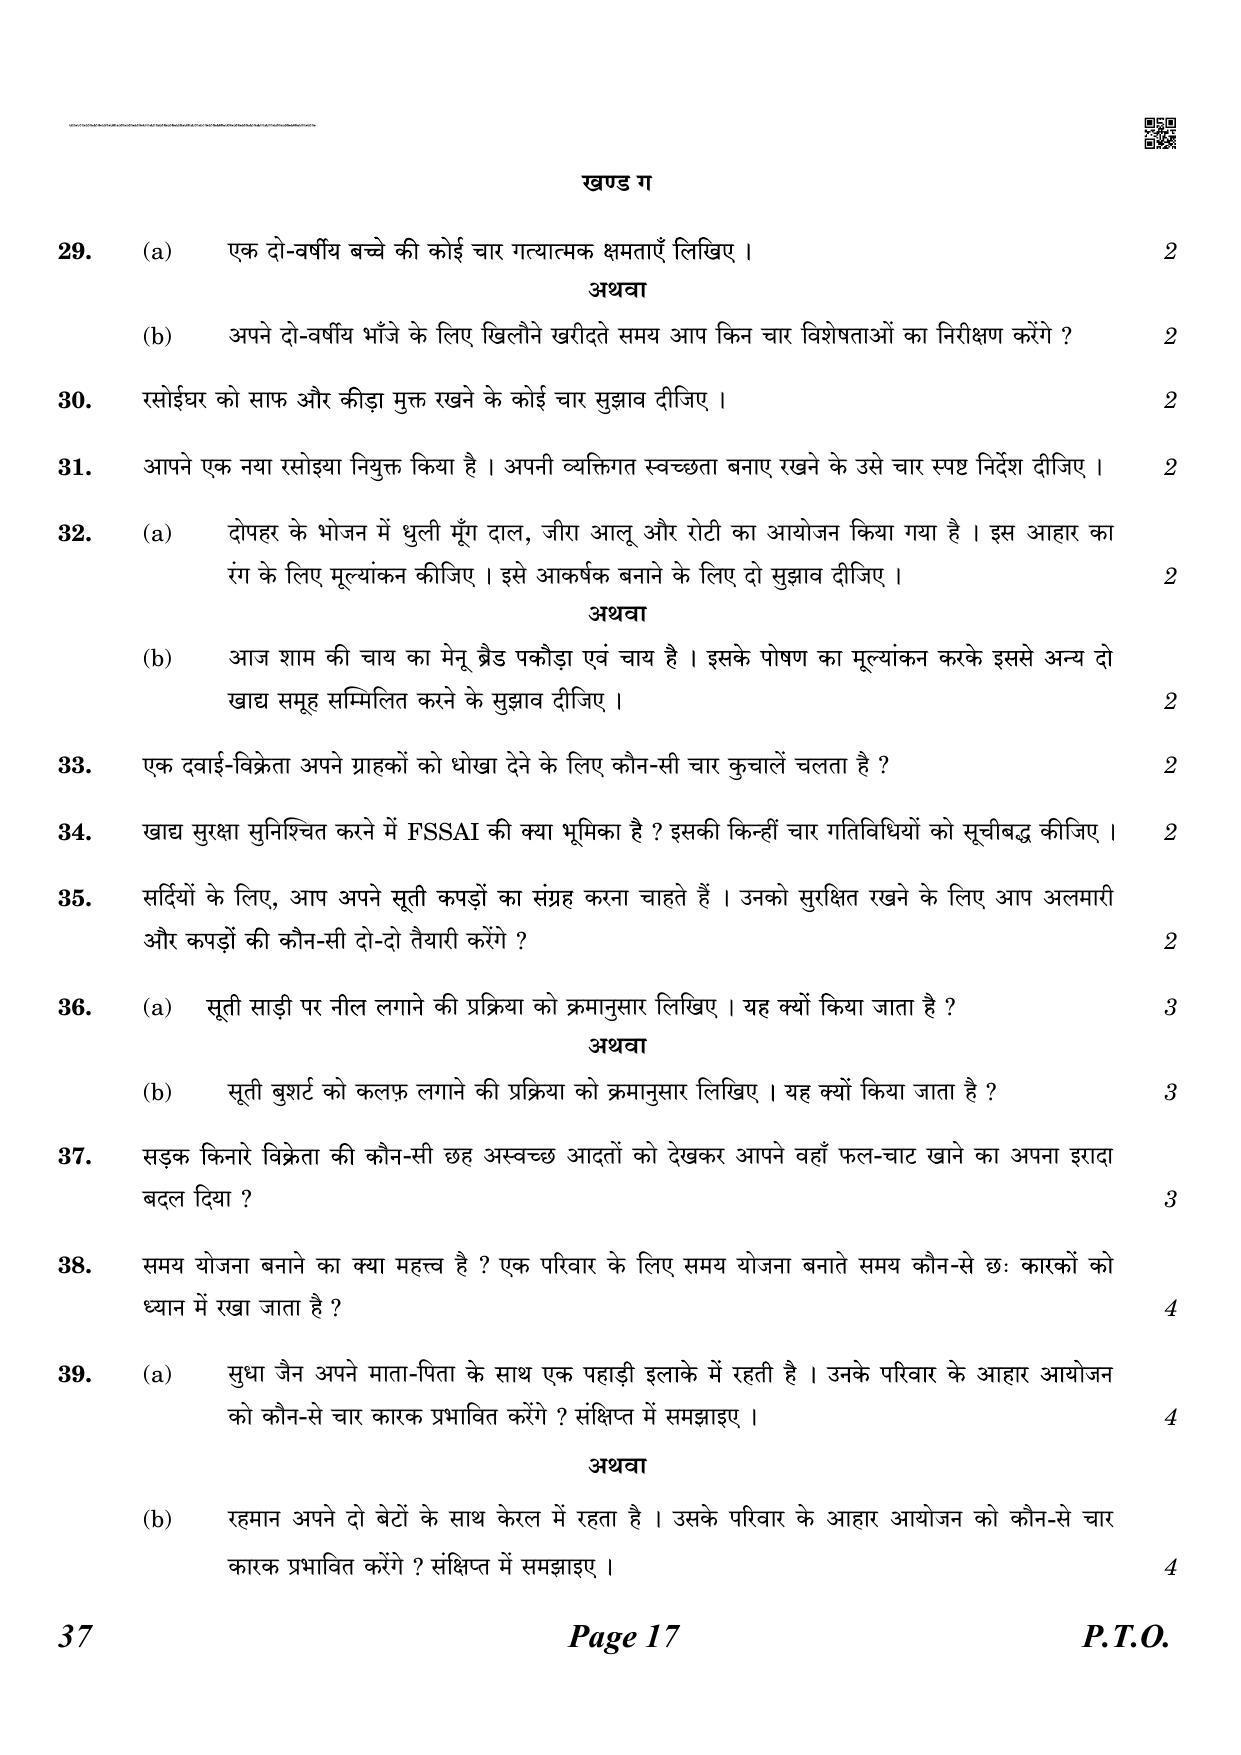 CBSE Class 10 QP_064_Home_Science 2021 Compartment Question Paper - Page 17